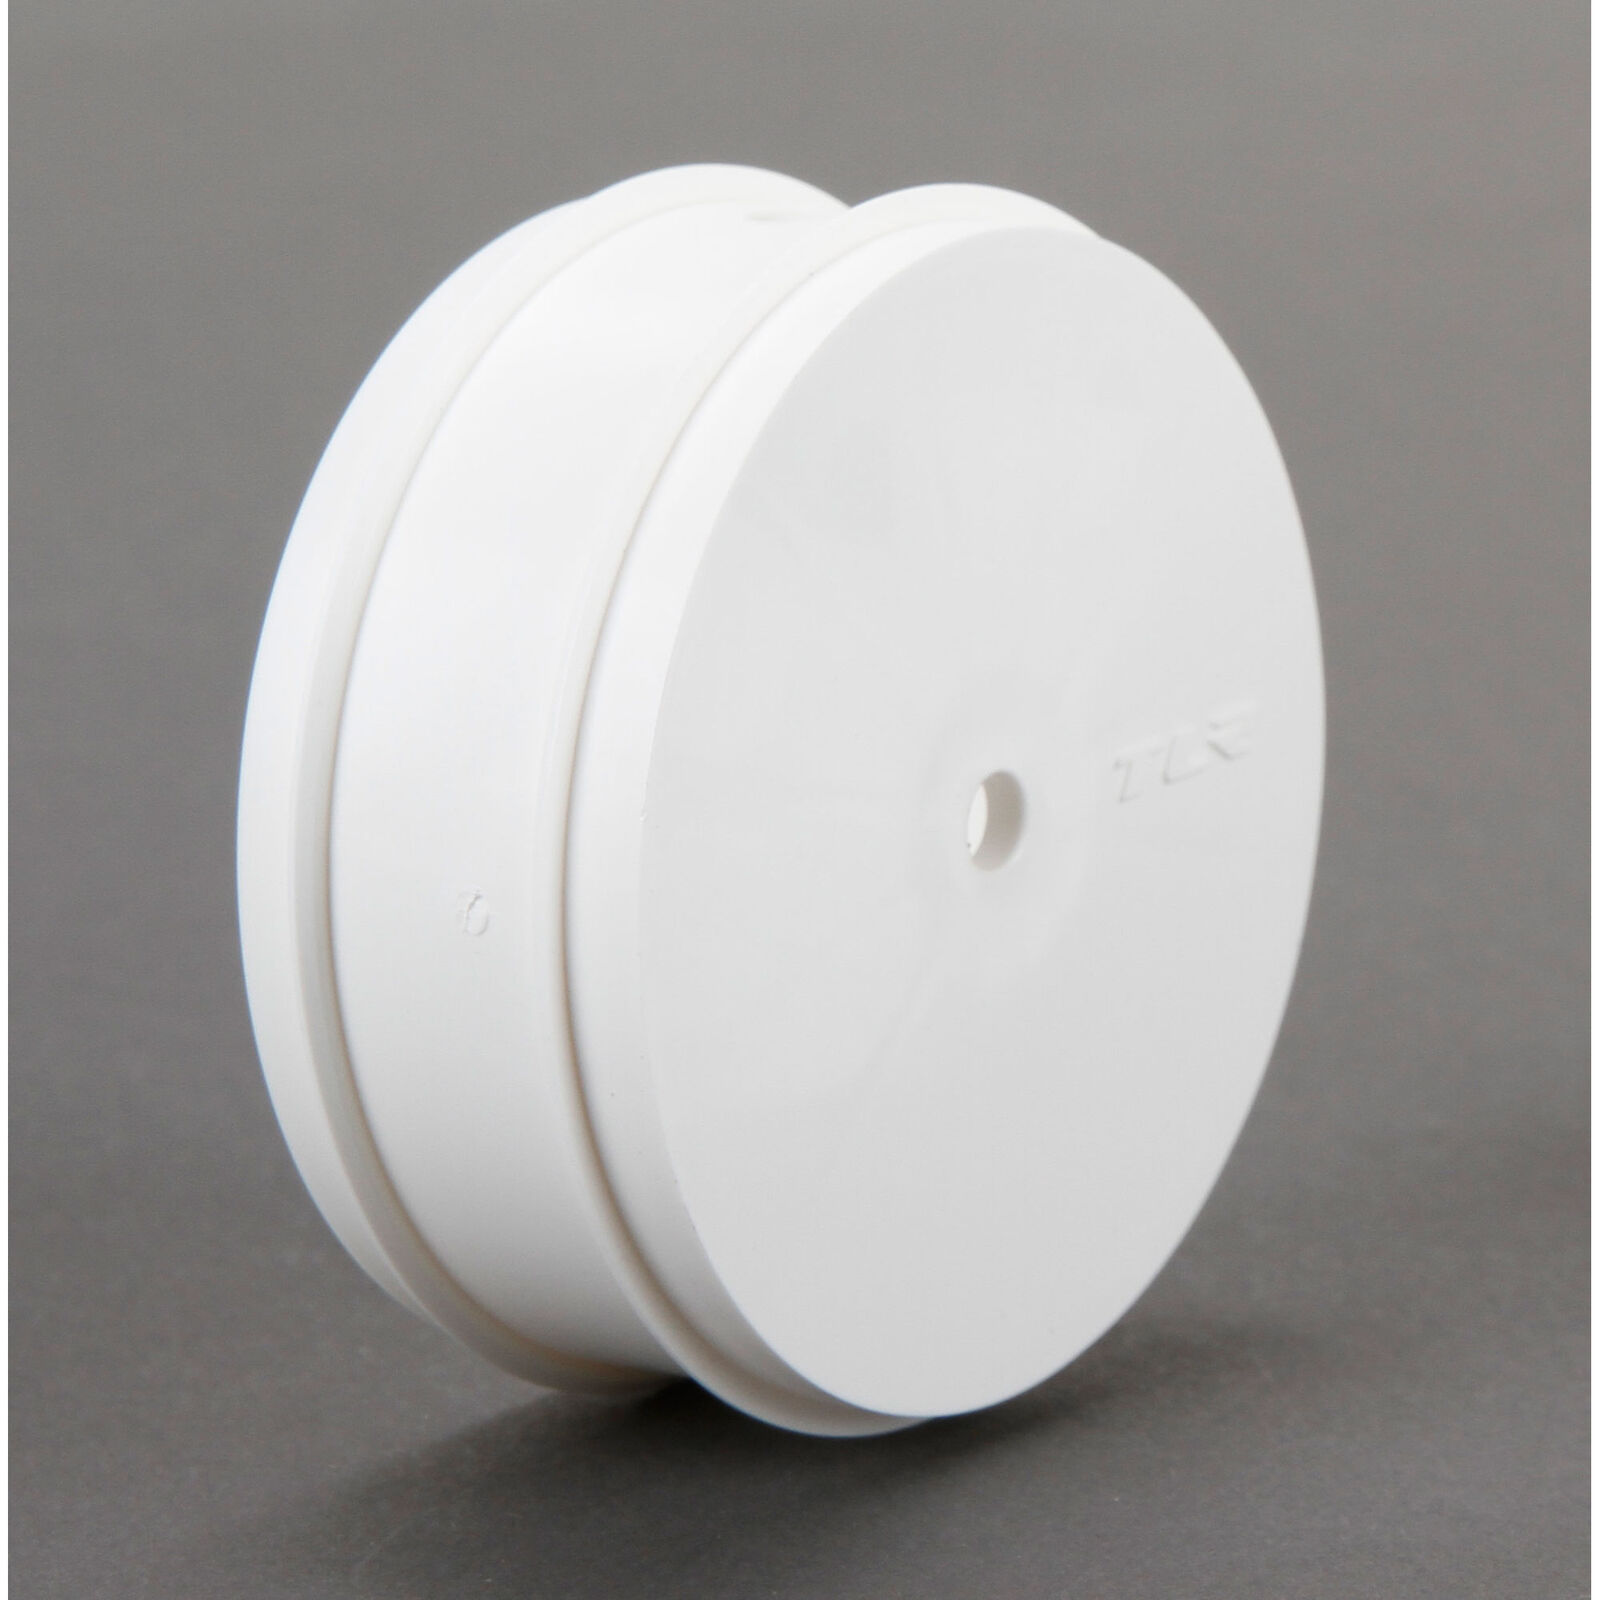 1/10 Front Buggy 61mm Wheels, 12mm Hex, White (2): 22 3.0